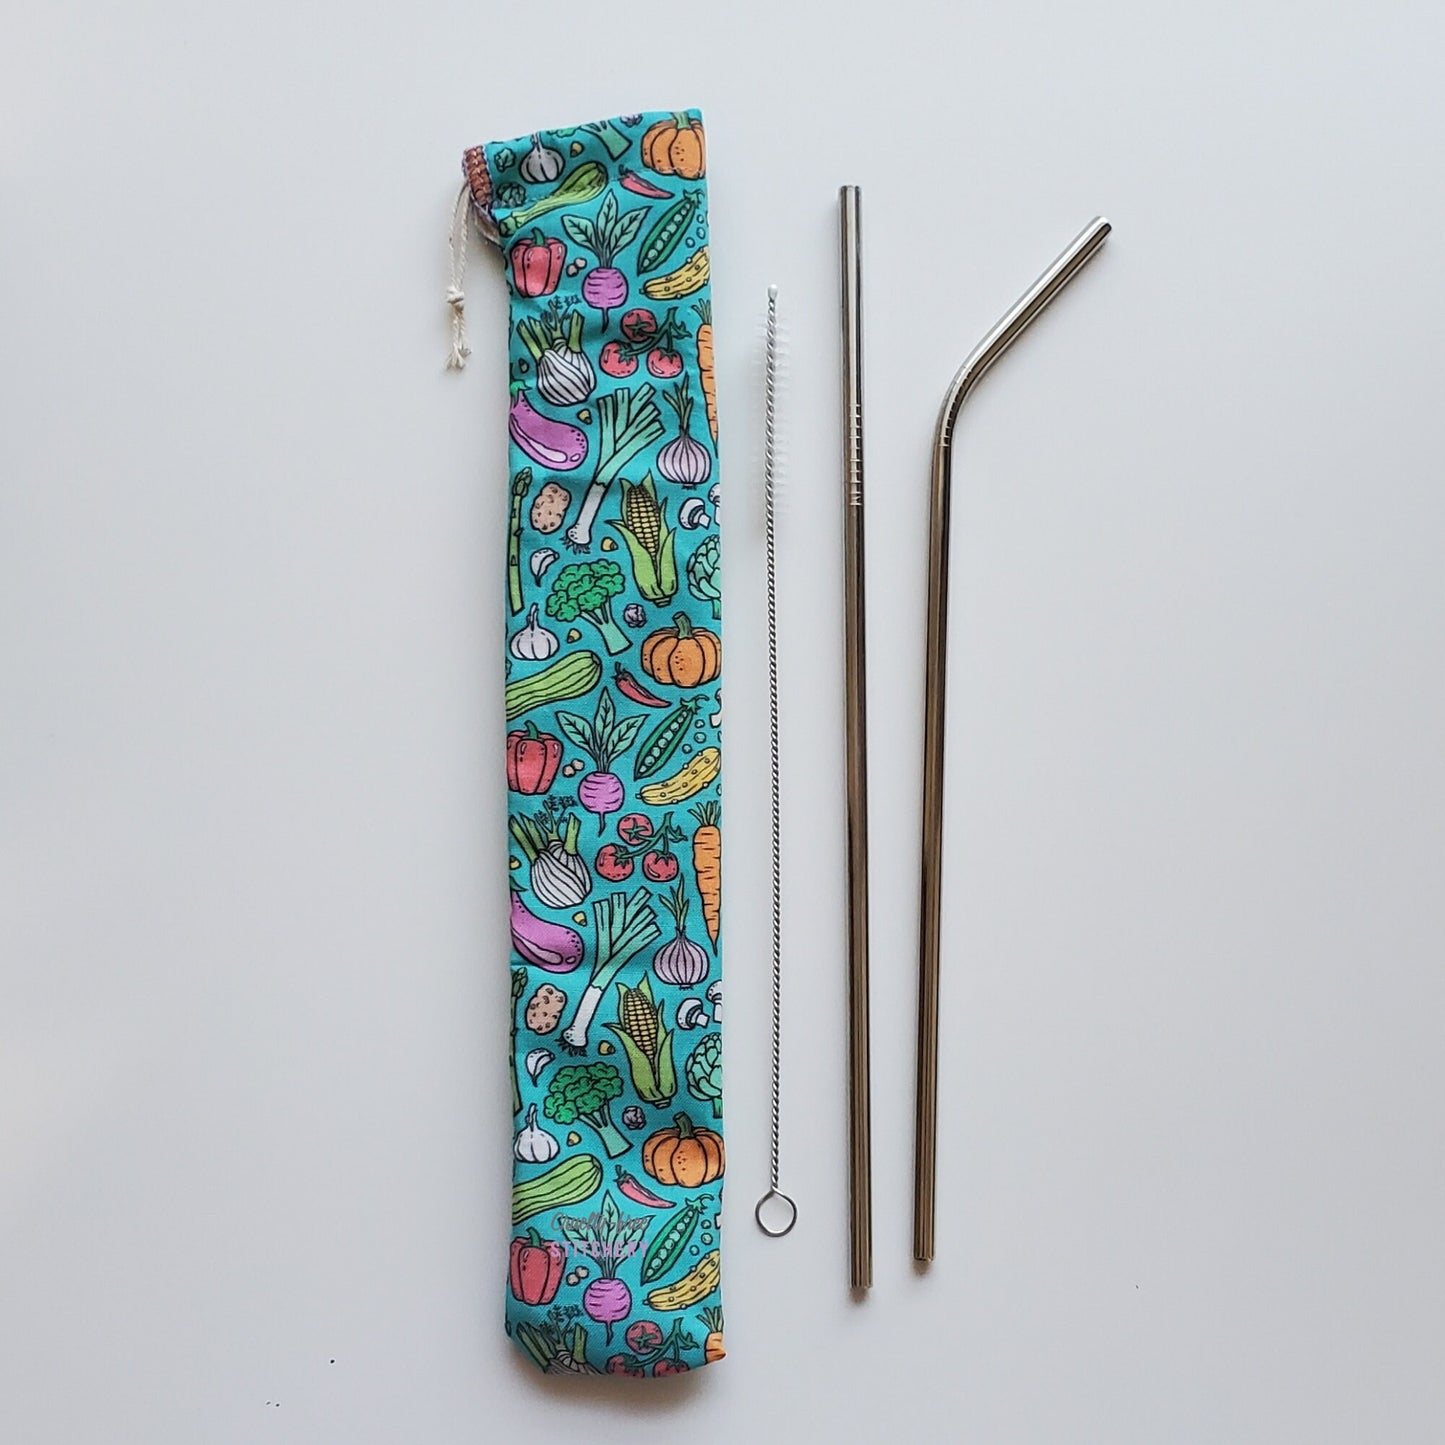 Reusable straw pouch in the same vegetable print laying vertically next to a straw cleaner brush, a straight stainless steel straw, and a bent stainless steel straw.